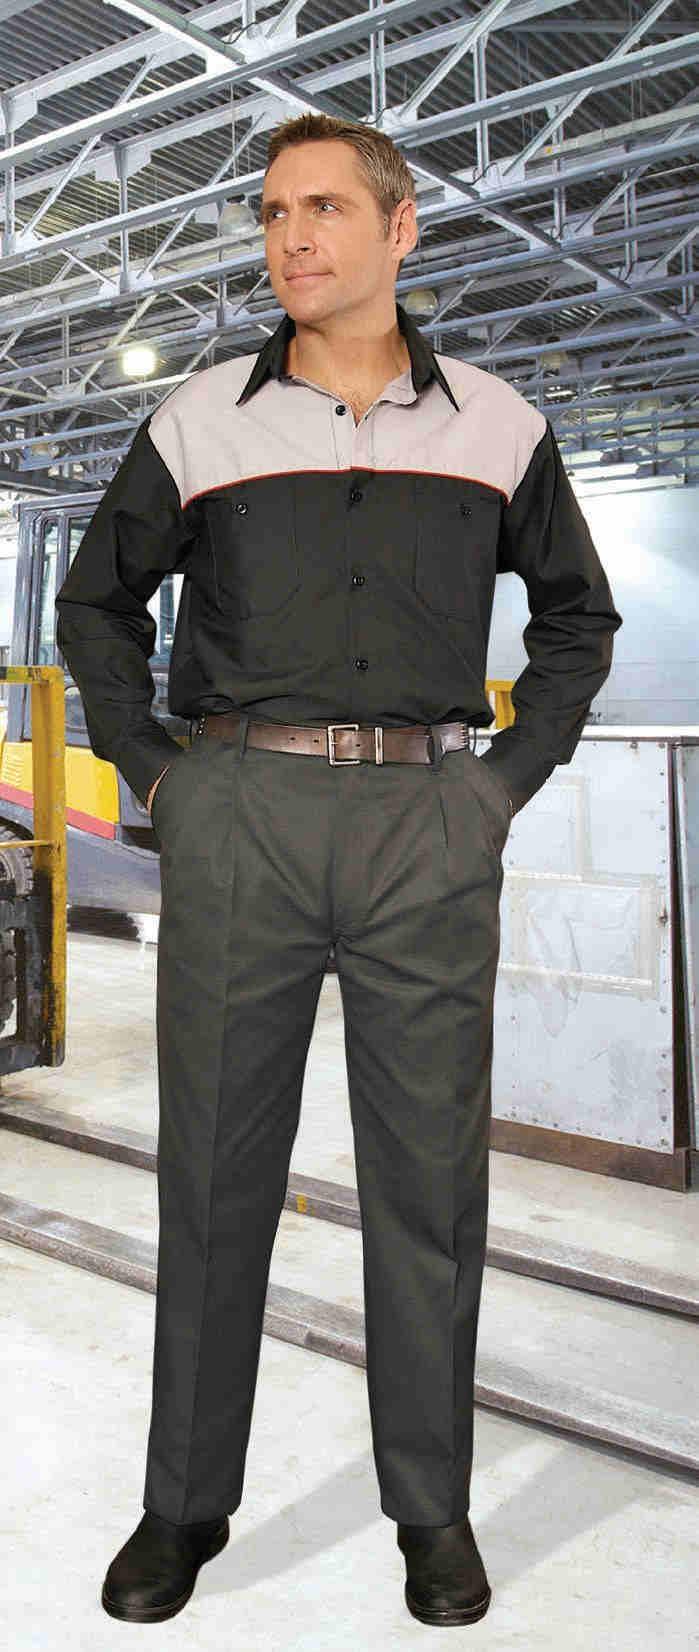 WORK PANTS 2140 Pleated Pants Special environments and assignments require special features. We are pleased to offer pleated pants to provide more style and utility options.